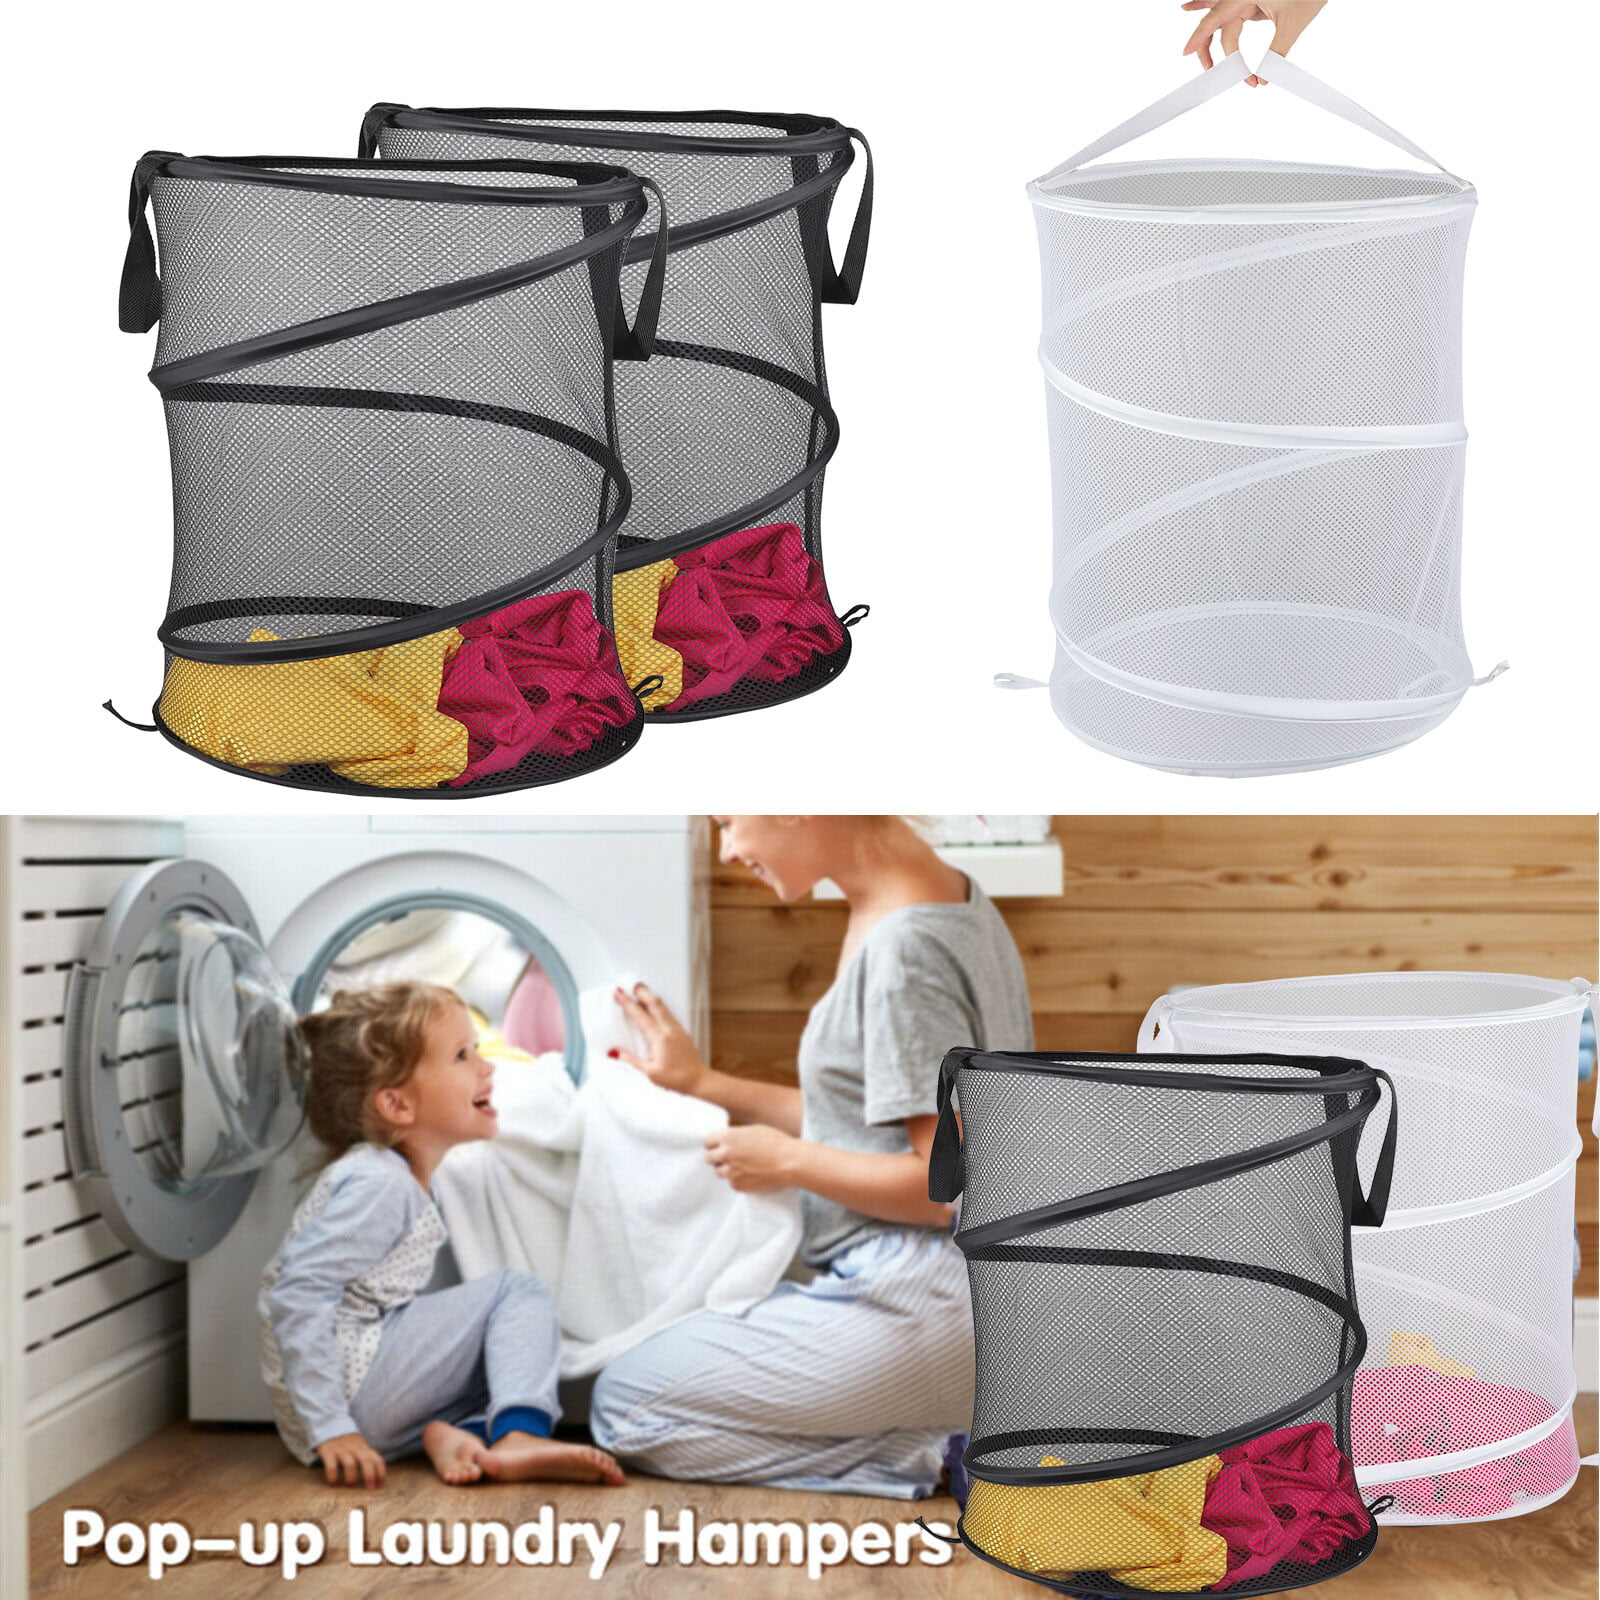 Quantity 6 Details about   FQ44010 Mesh Spiral Pop Up Laundry Hampers With Carry Handles 